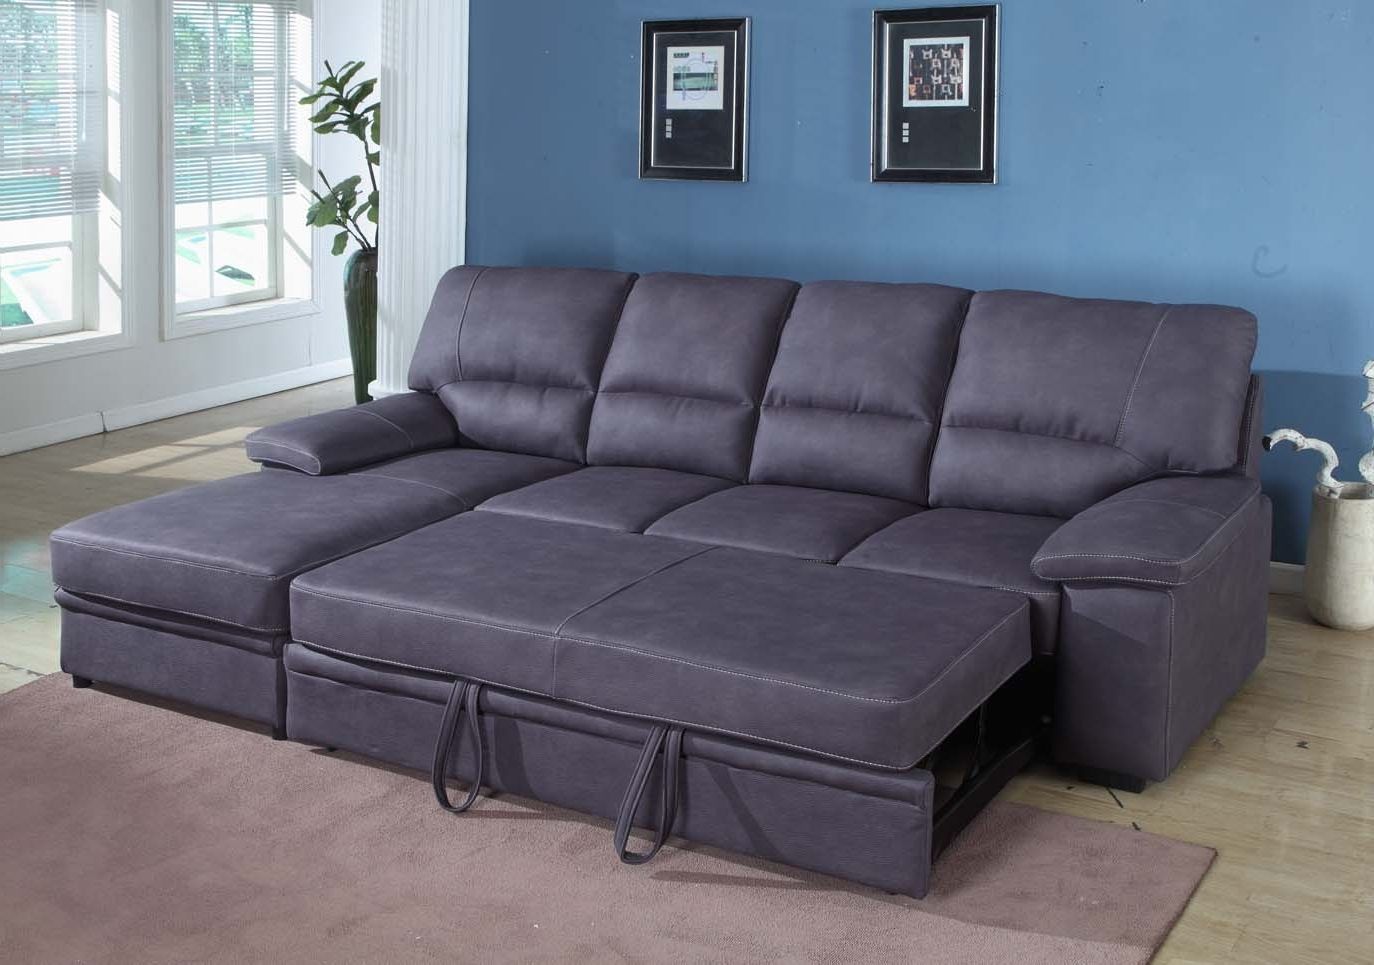 king size bed sofa sleeper sectional